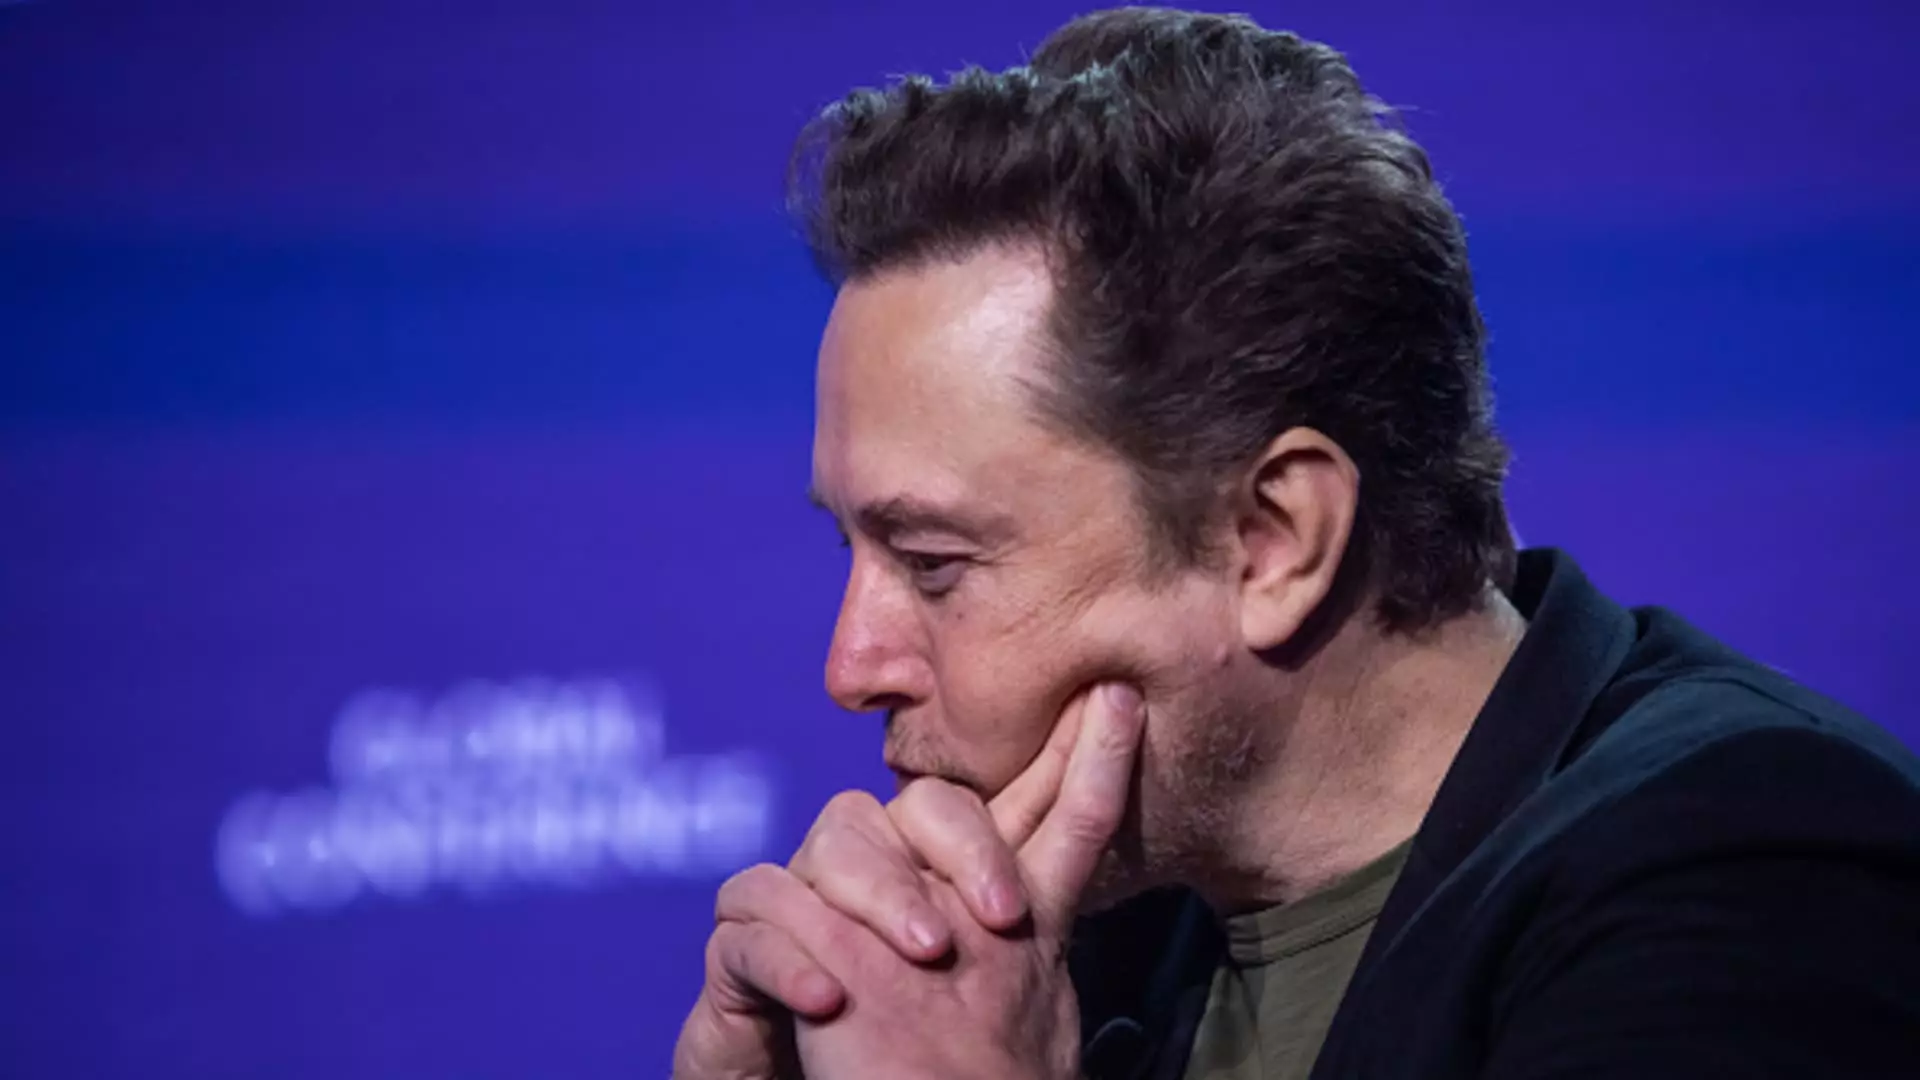 The Detriment of Divided Focus: A Closer Look at Elon Musk and Tesla’s Future